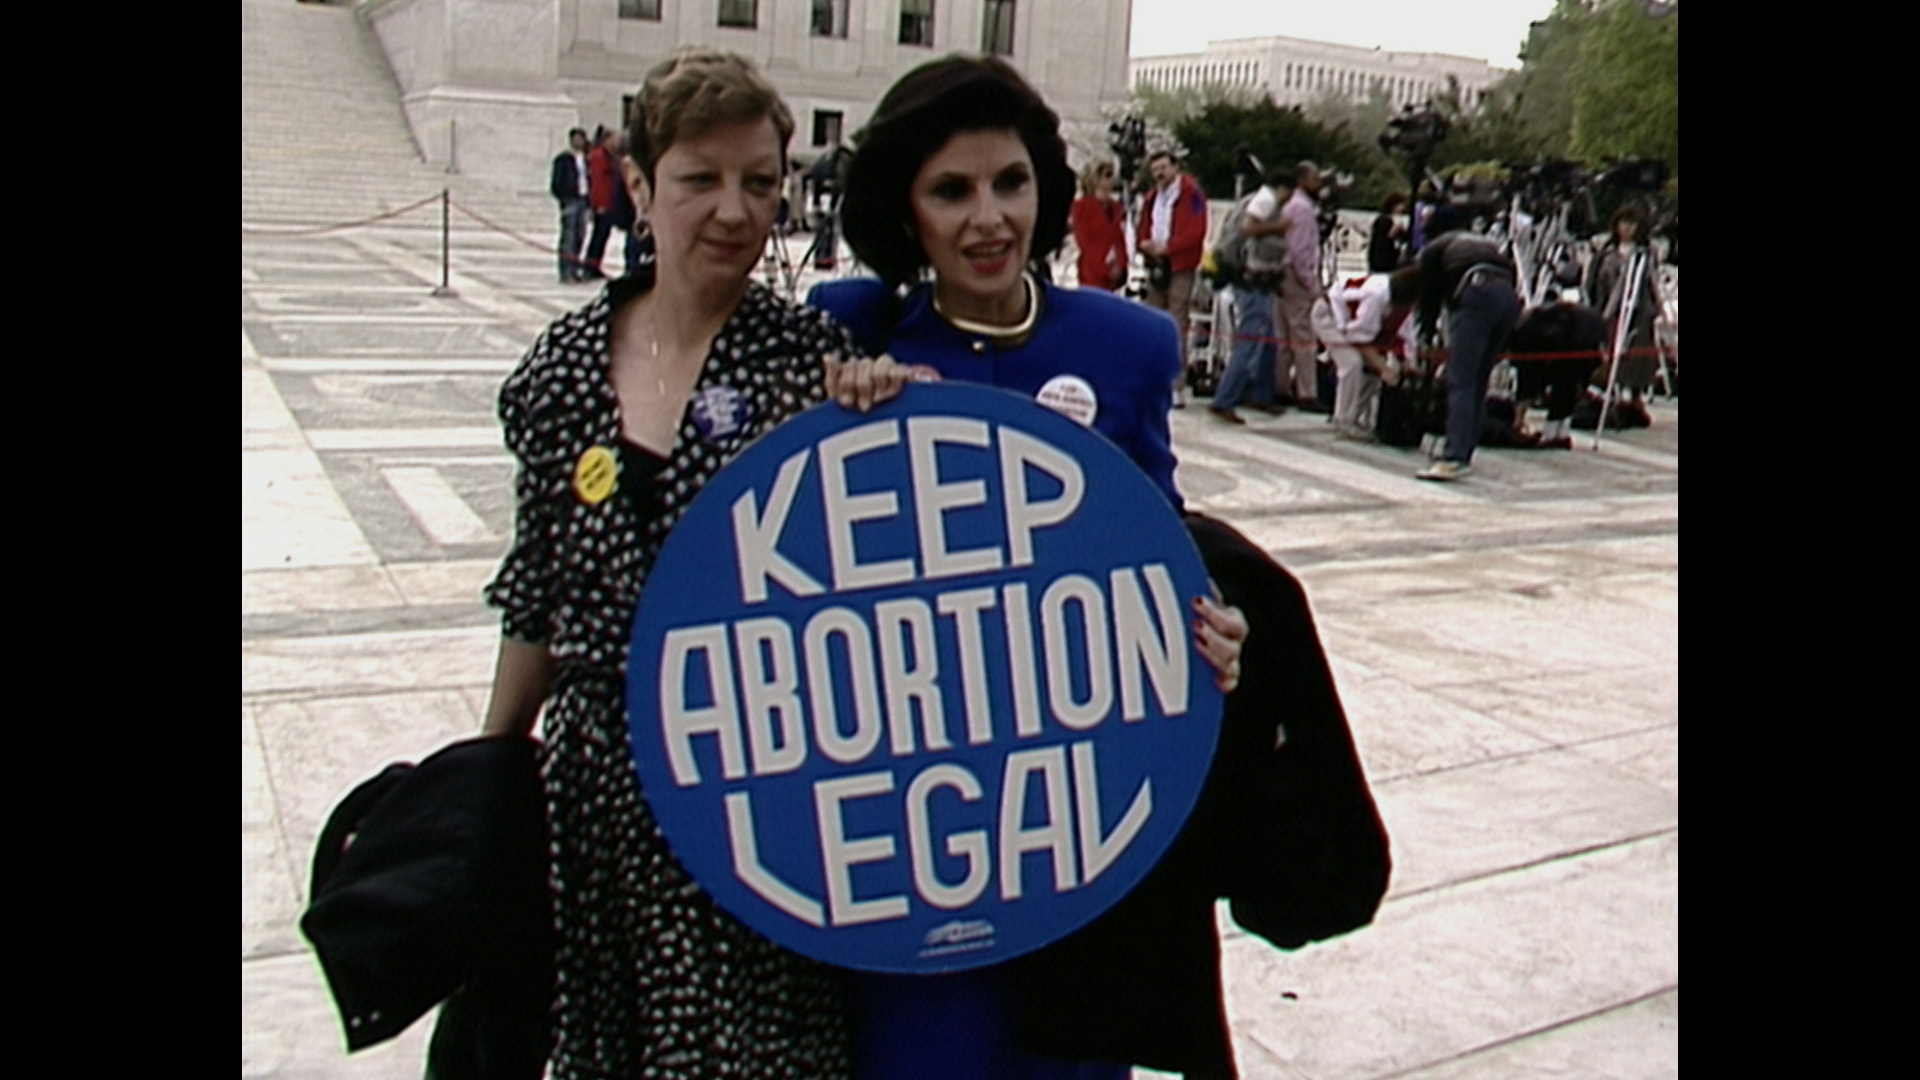 Trailer still frame from AKA Jane Roe, two women holding sign "keep abortion legal"